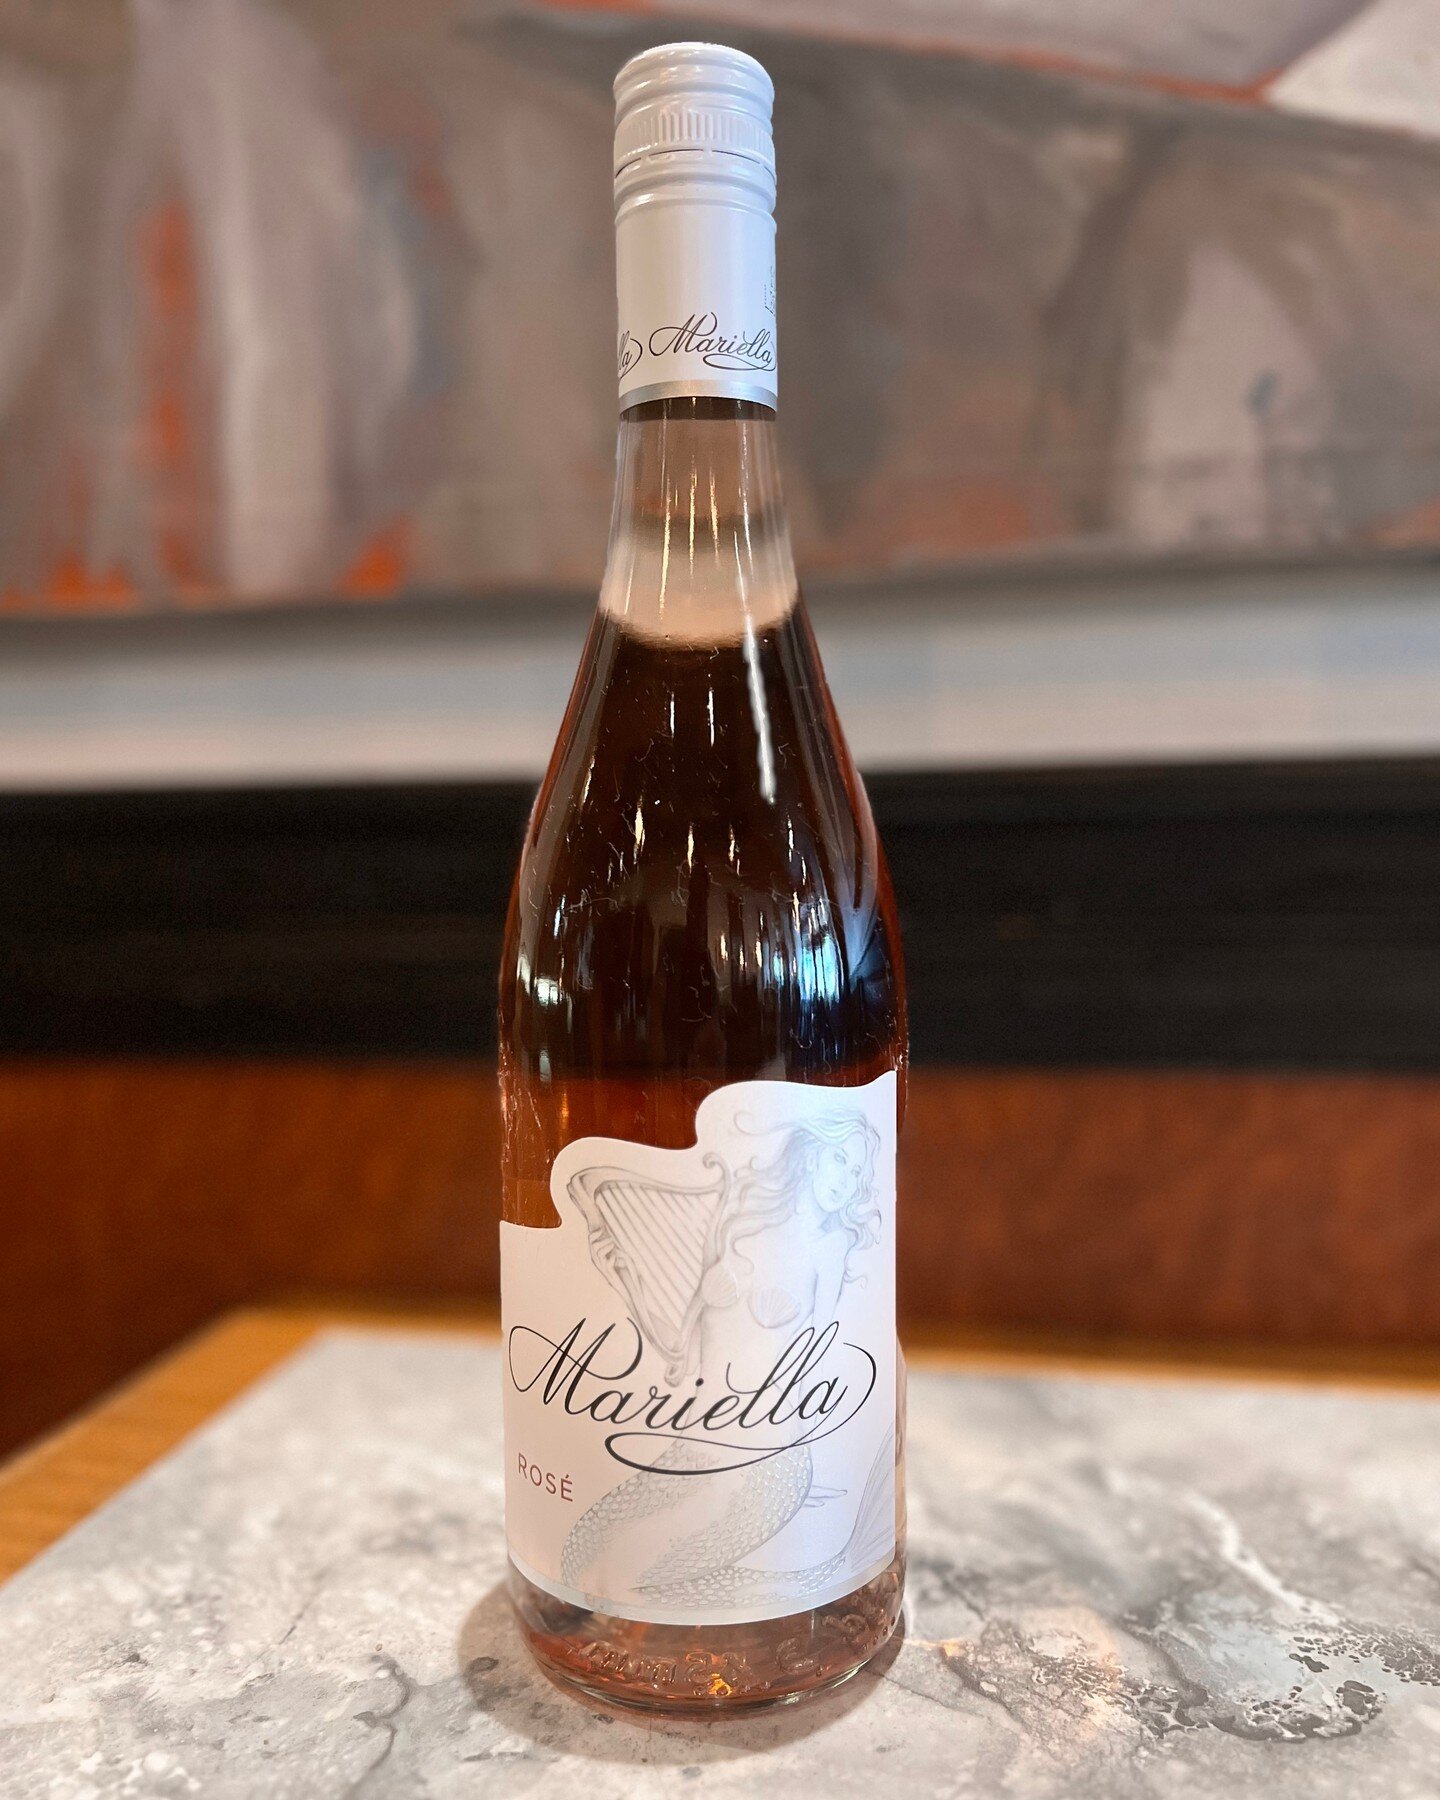 Take $5 off this week's Wine Down Summer featured wine 🍷 Mariella Ros&eacute;
Light &amp; crisp with aromas of bright cherry, strawberry and watermelon. Perfect for these warm summer nights!